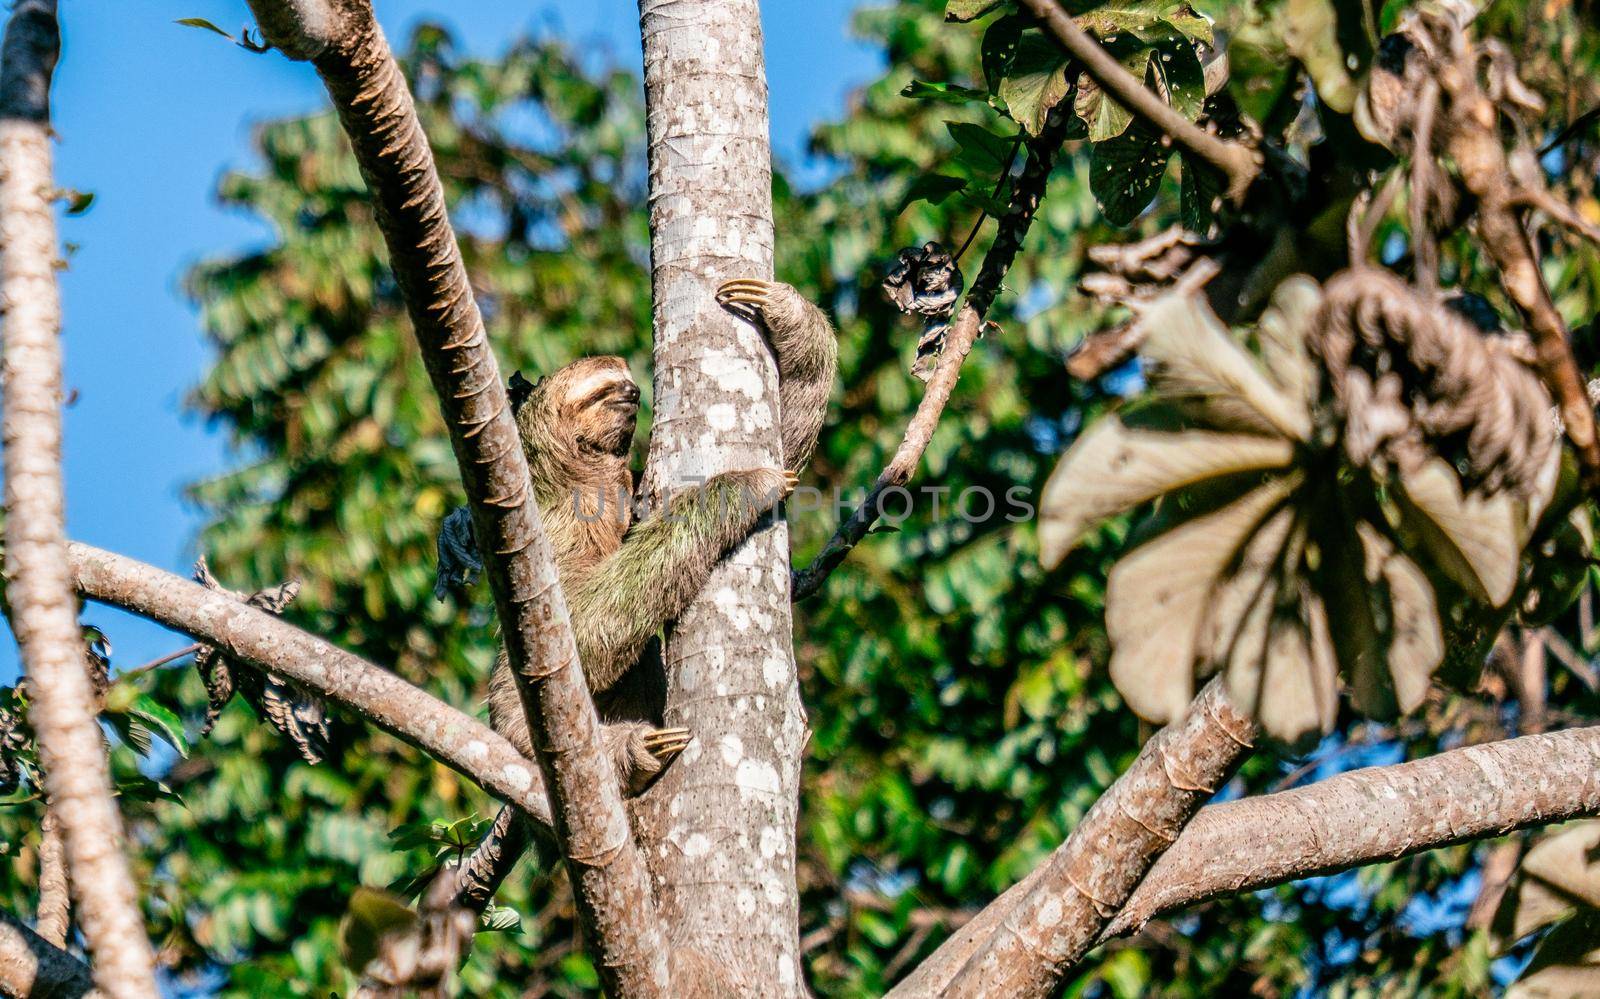 Cute Sloth on the tree - Costa rica by Esperophoto